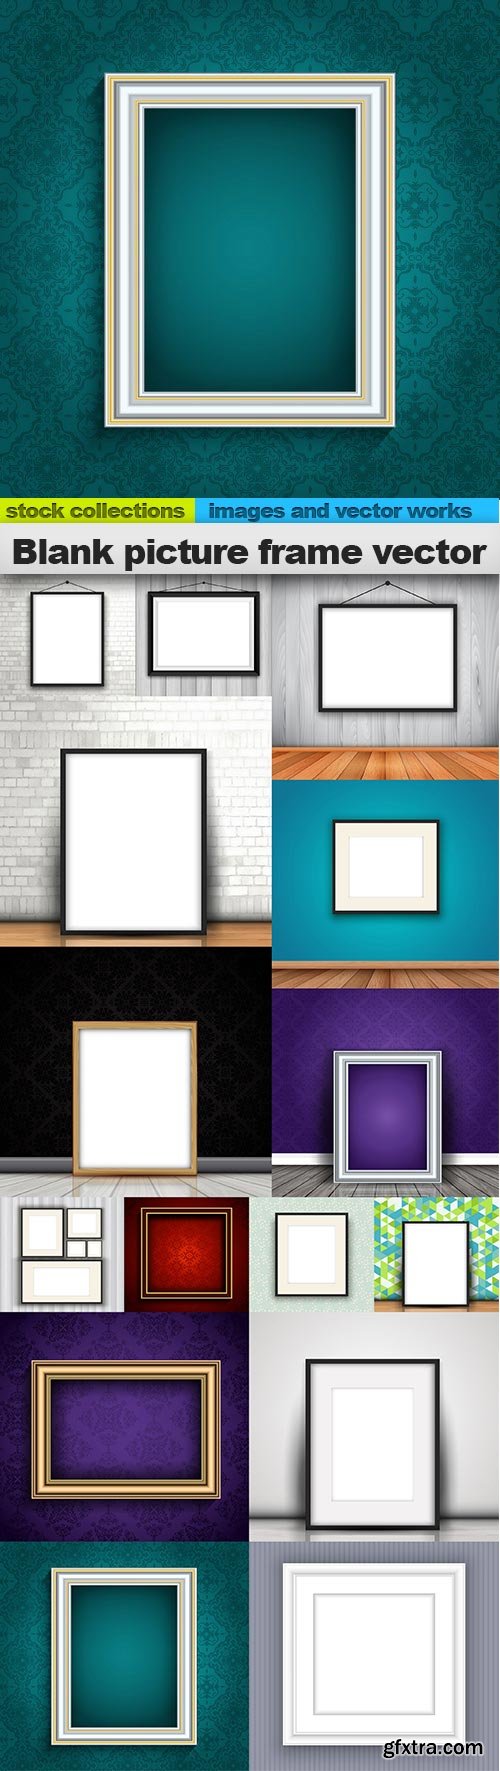 Blank picture frame vector, 15 x EPS